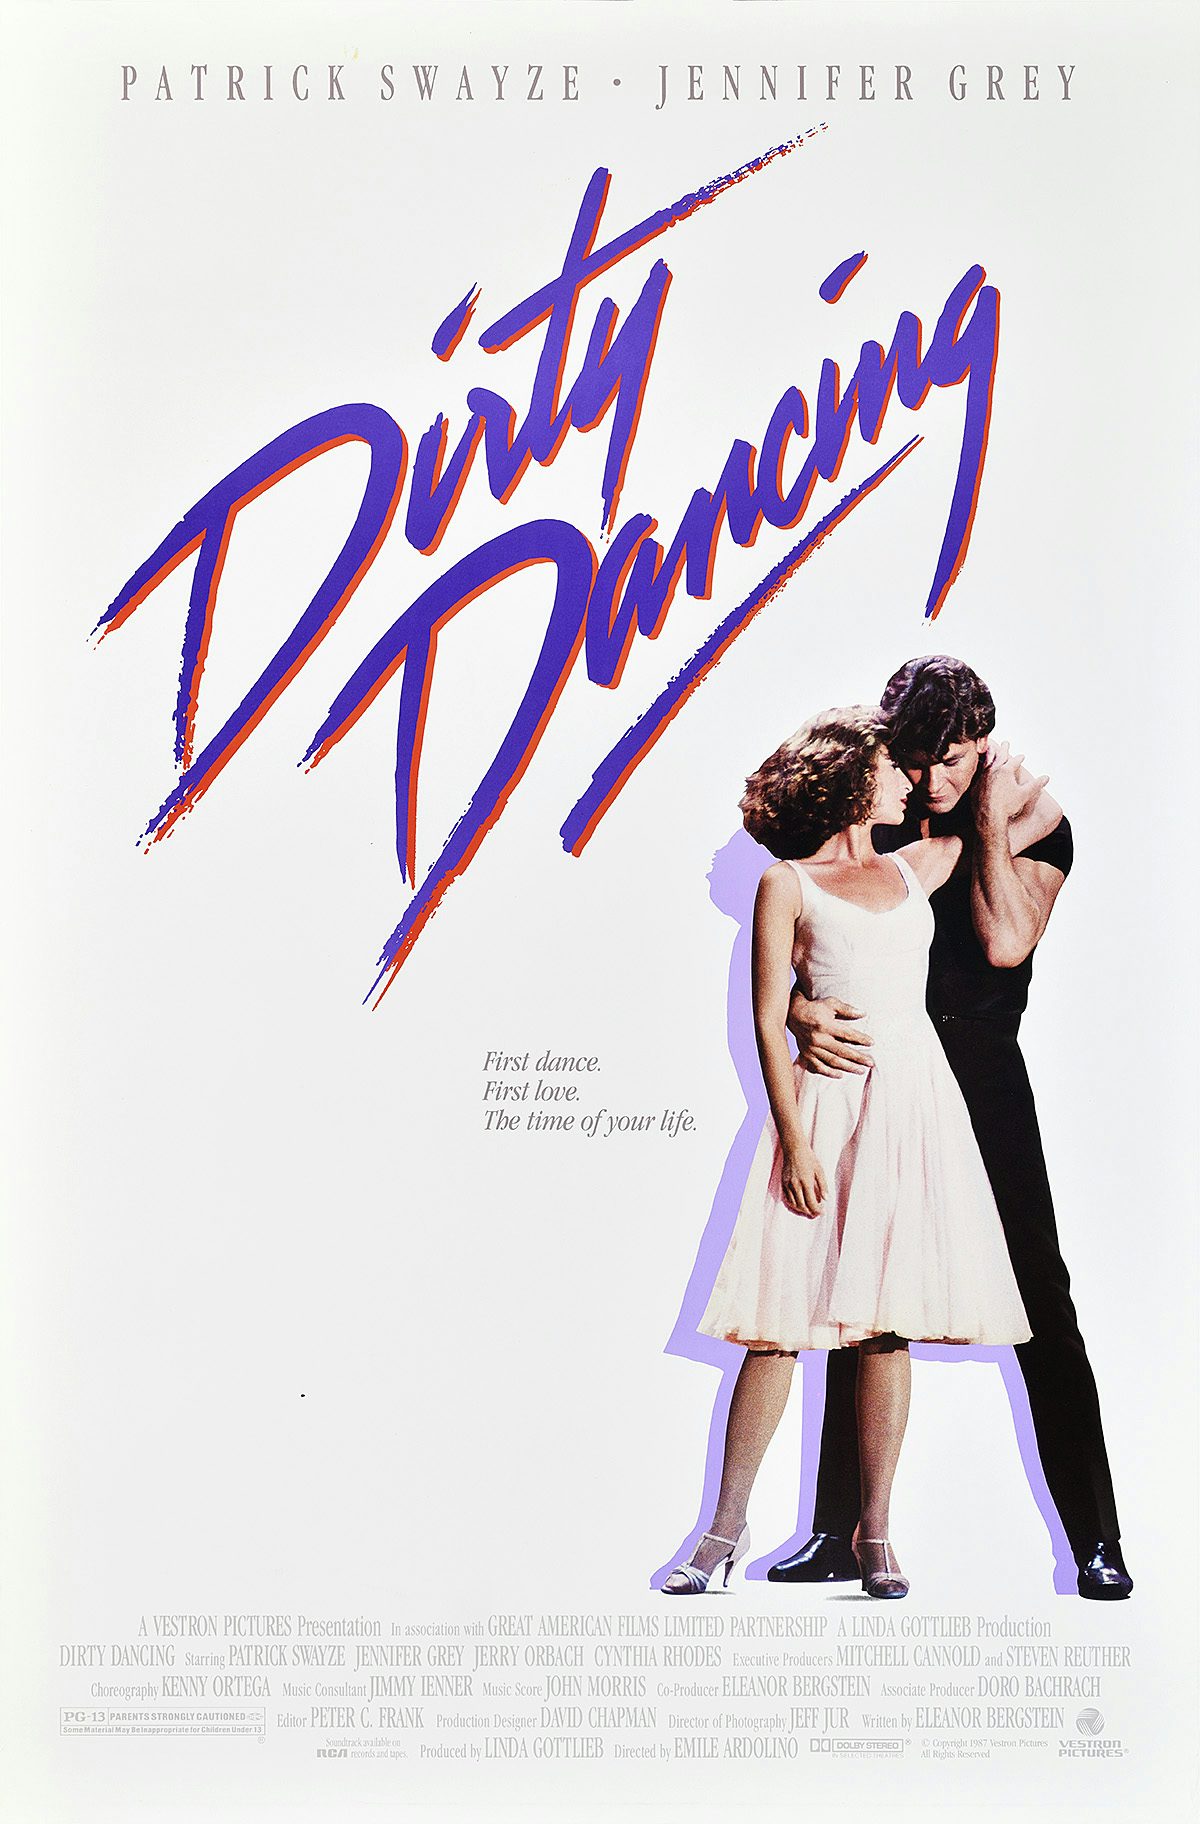 Image shows the poster design for Dirty Dancing featuring a cut-out photograph of stars Patrick Swayze in a black outfit and Jennifer Grey in a white dress, with purple drop shadows against a white background. The movie title is written in purple and red cursive, and the poster features the copy 'First dance, first love, the time of your life'